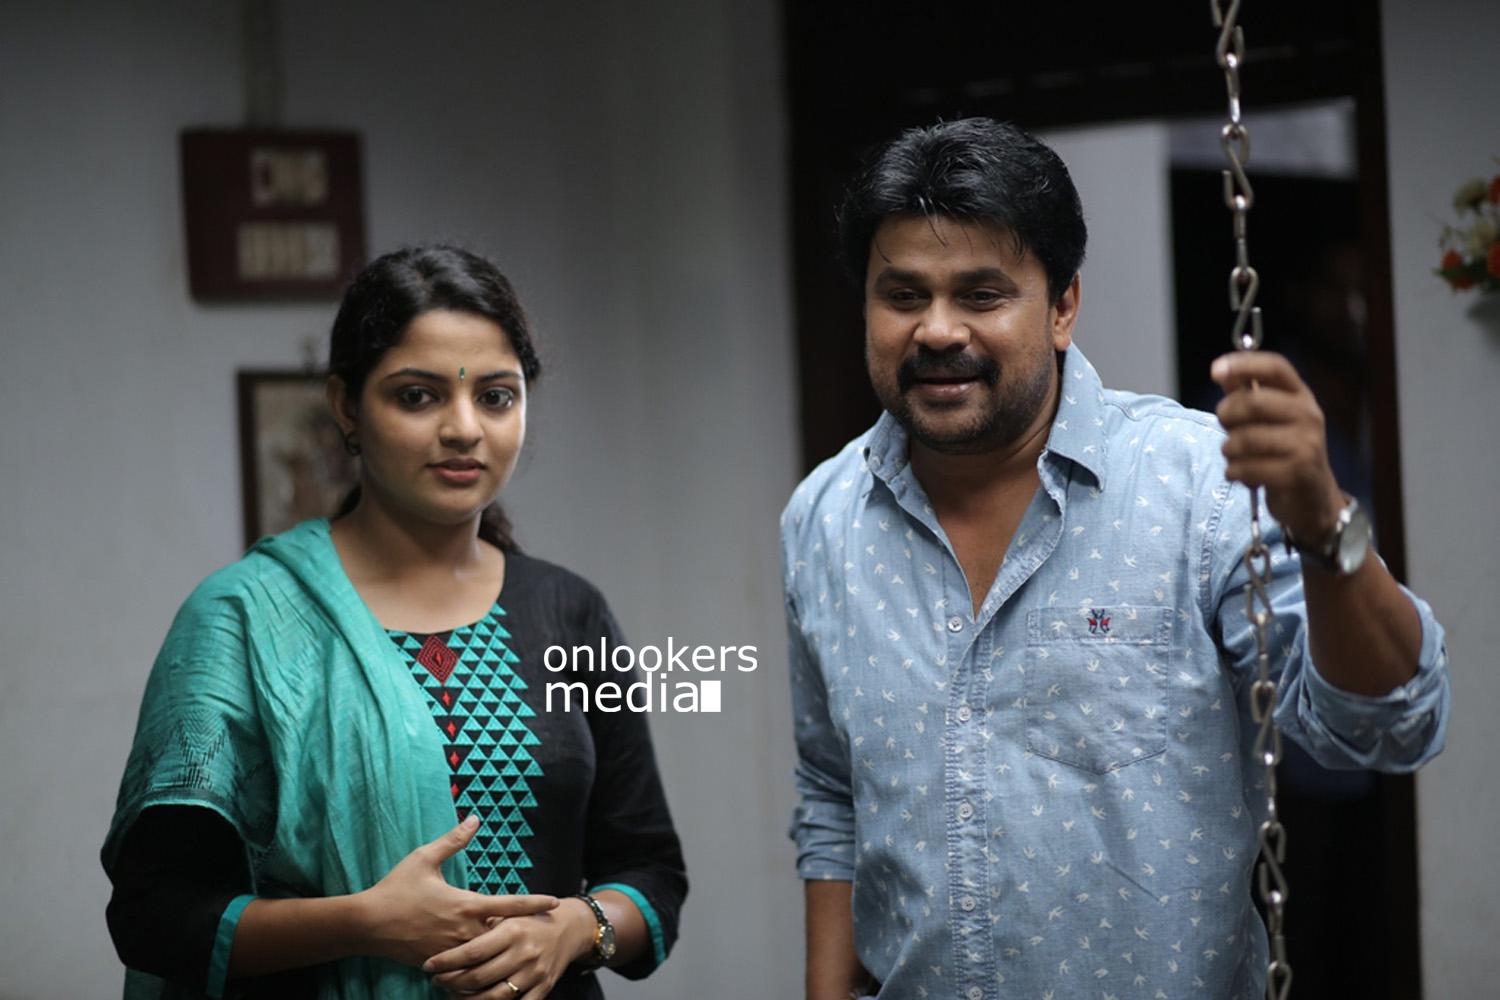 http://onlookersmedia.in/wp-content/uploads/2015/07/Dileep-and-Nikhila-Vimal-in-Love-24X7-Stills-Images-Photos-121.jpg